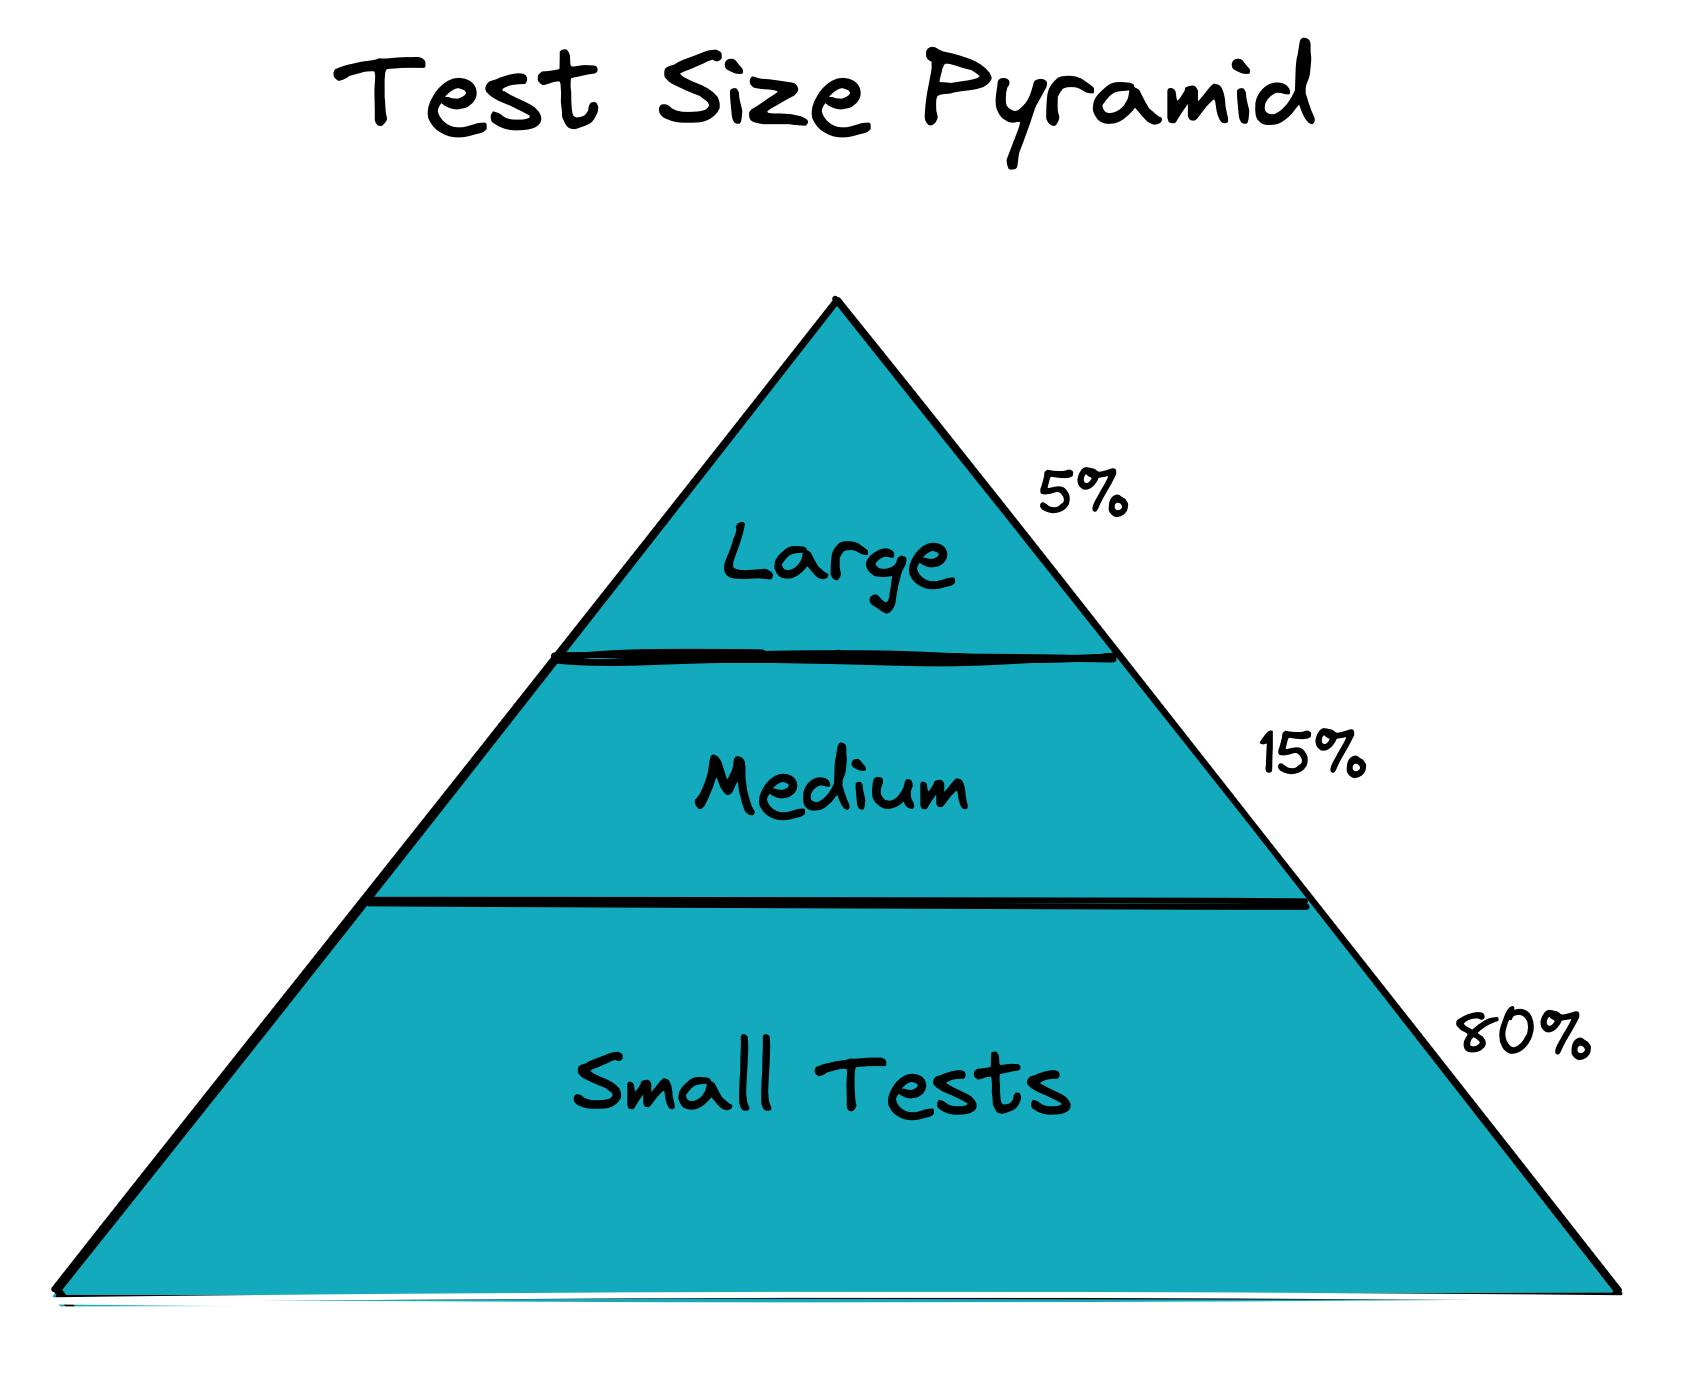 Test Size Pyramid.excalidraw.png